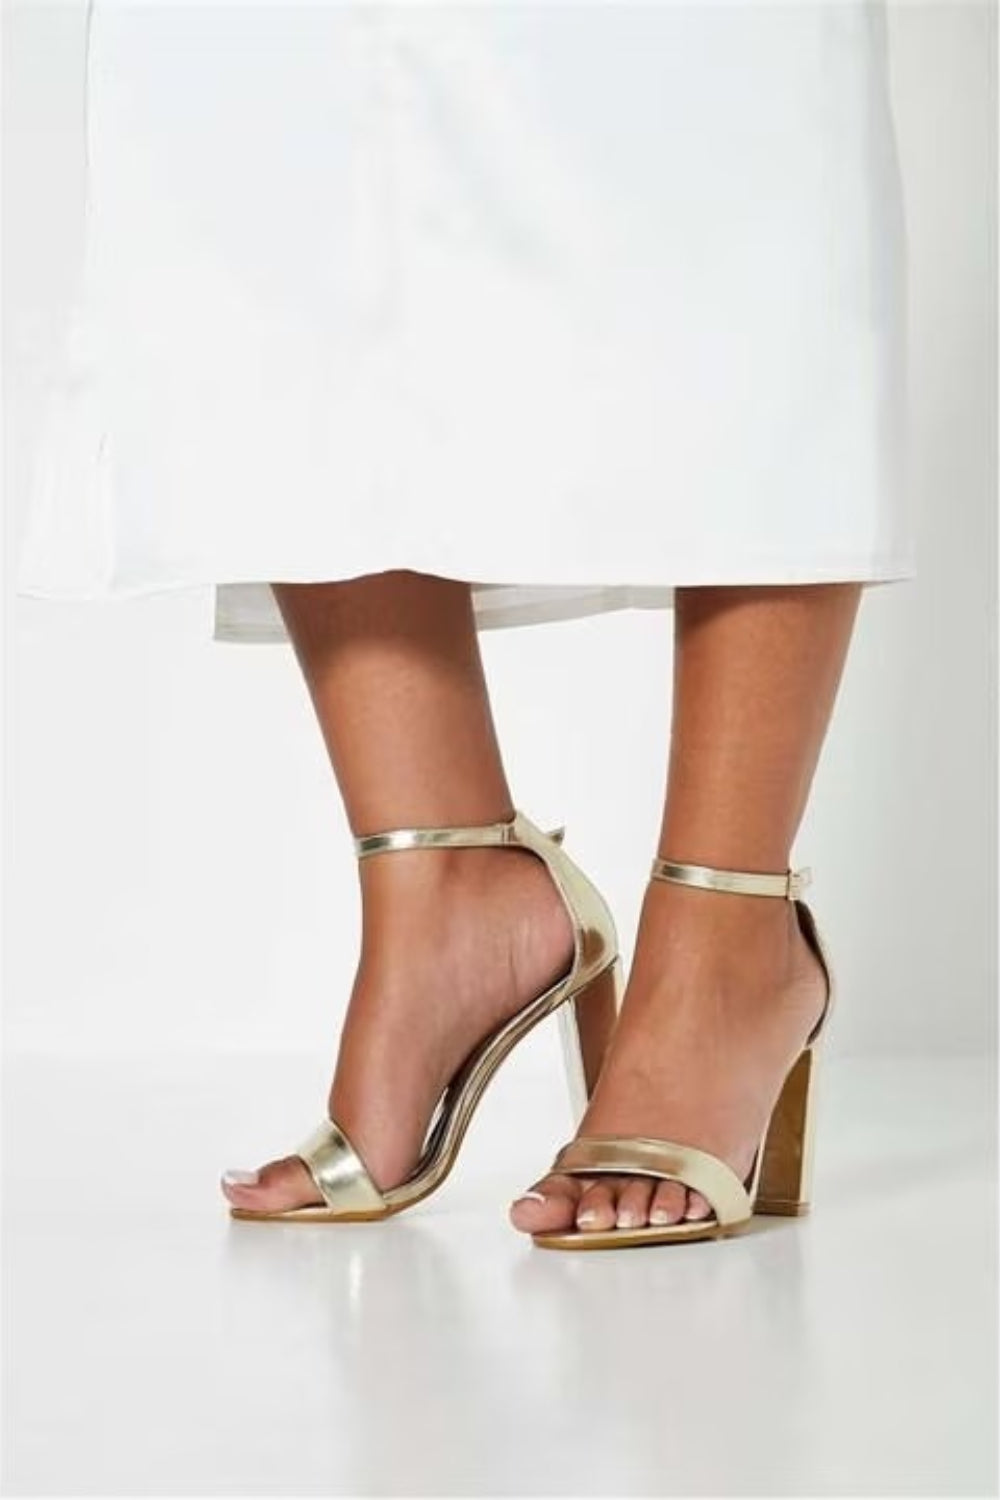 AJVANI high Heel Strappy Metallic Barely There Sandals Shoes Size 6 39 Rose  Gold: Amazon.co.uk: Fashion